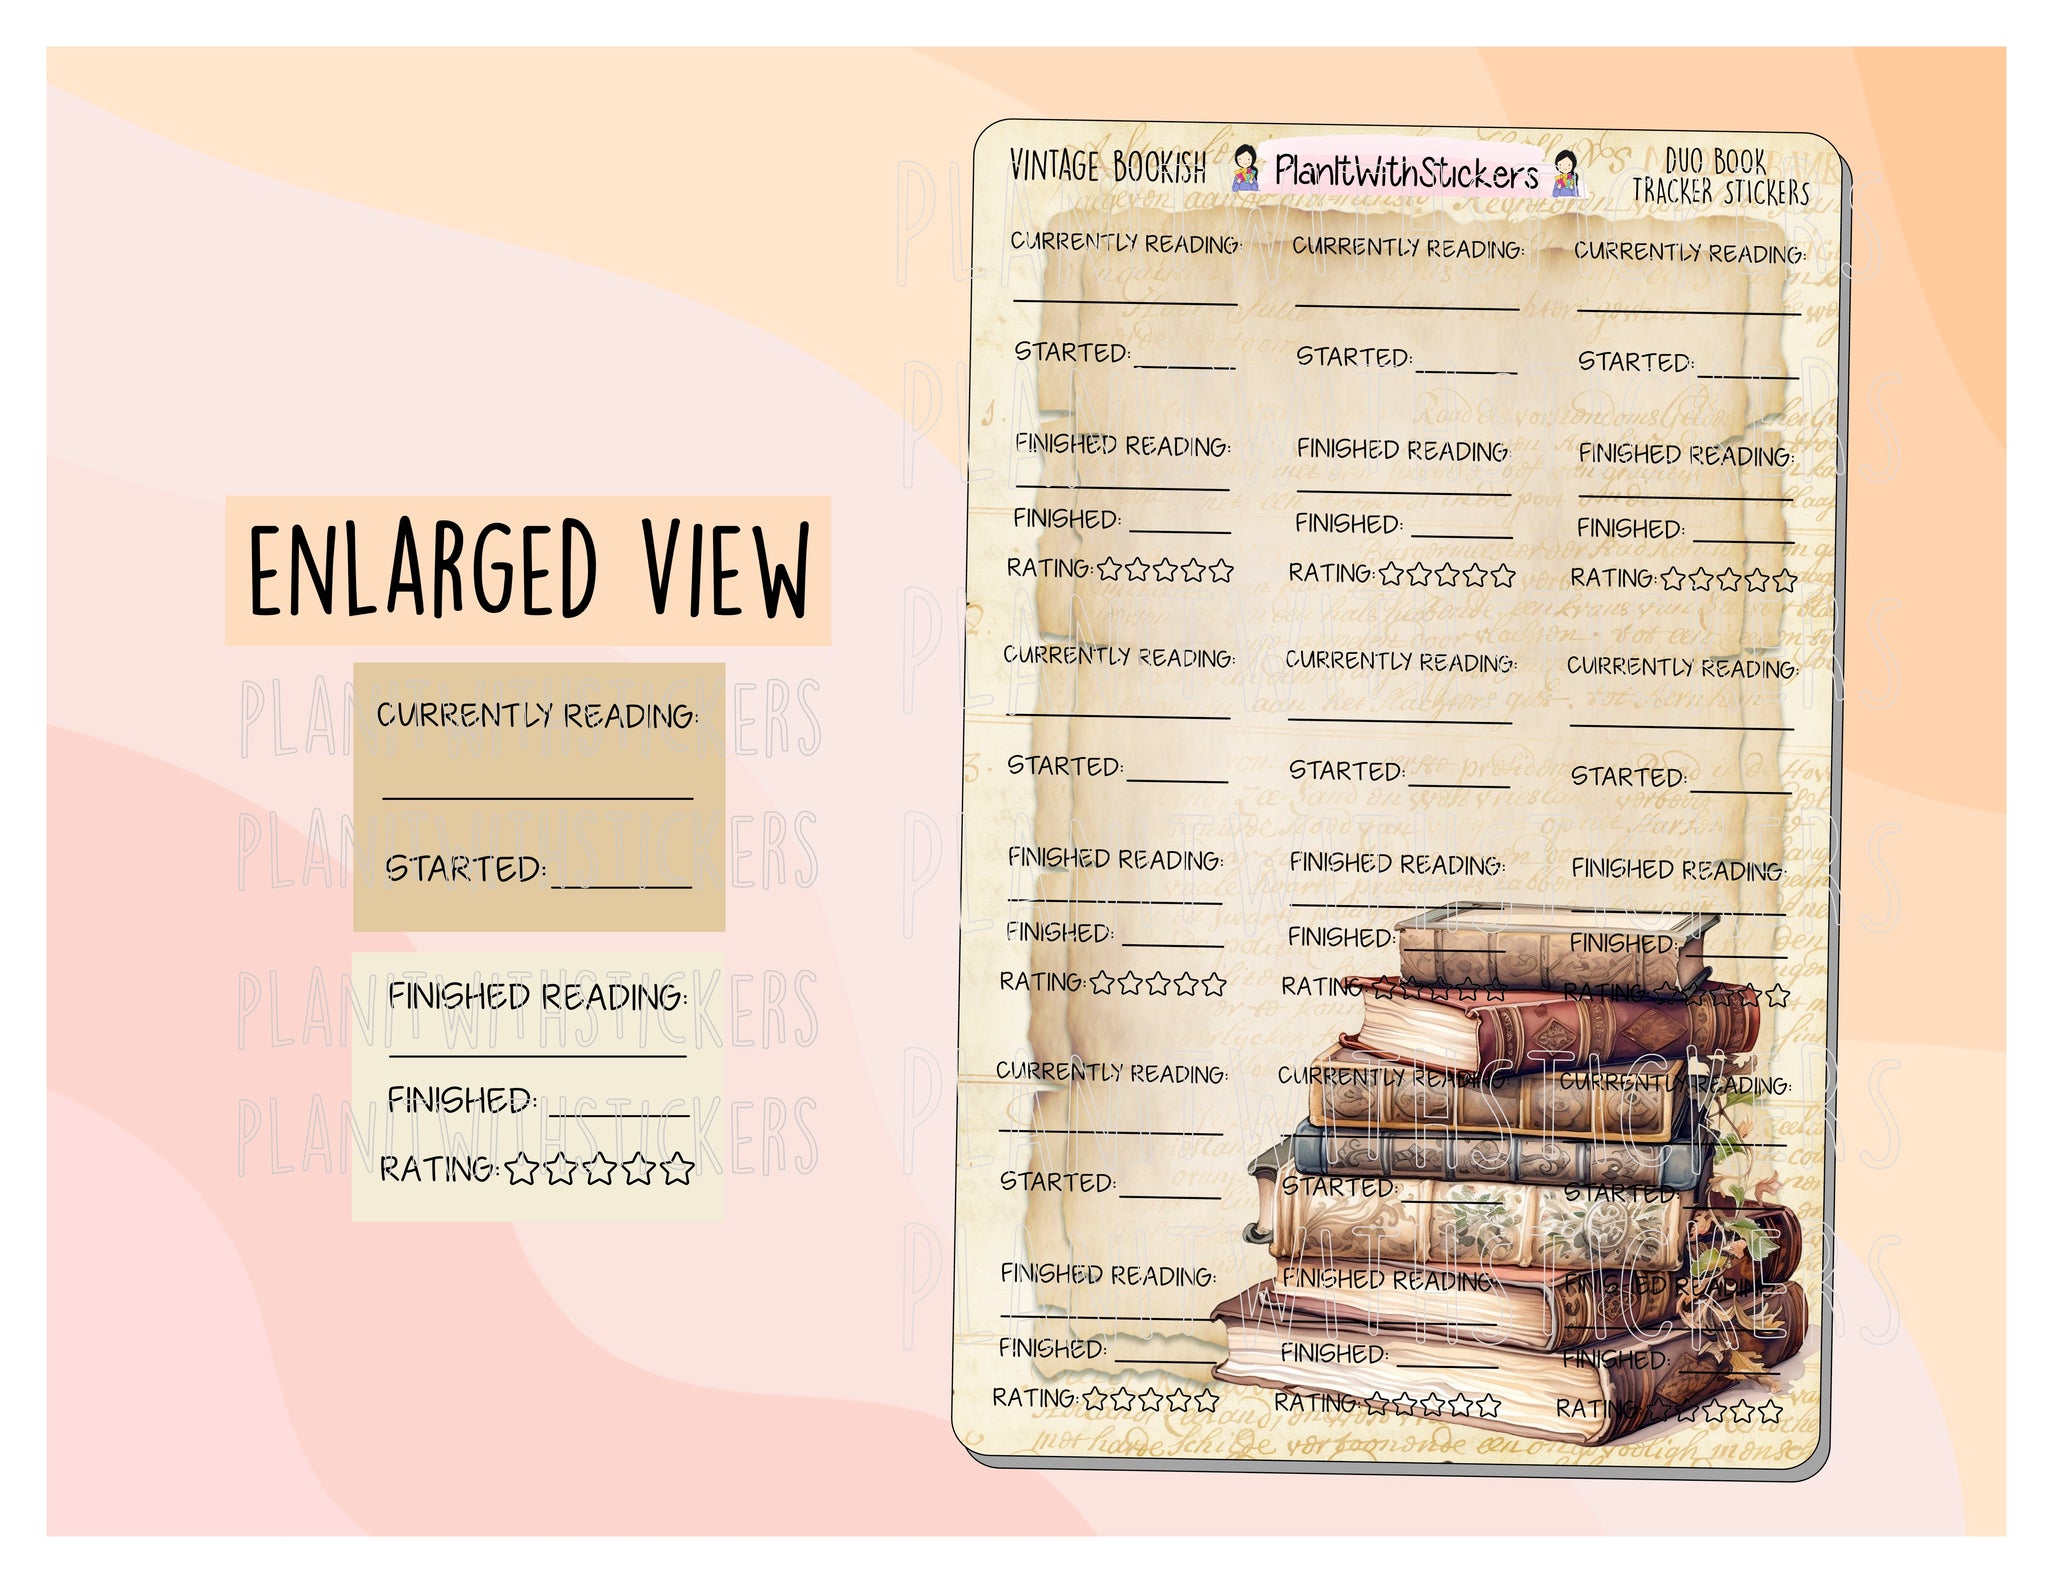 Vintage Library - Duo Book Reading Tracker Stickers